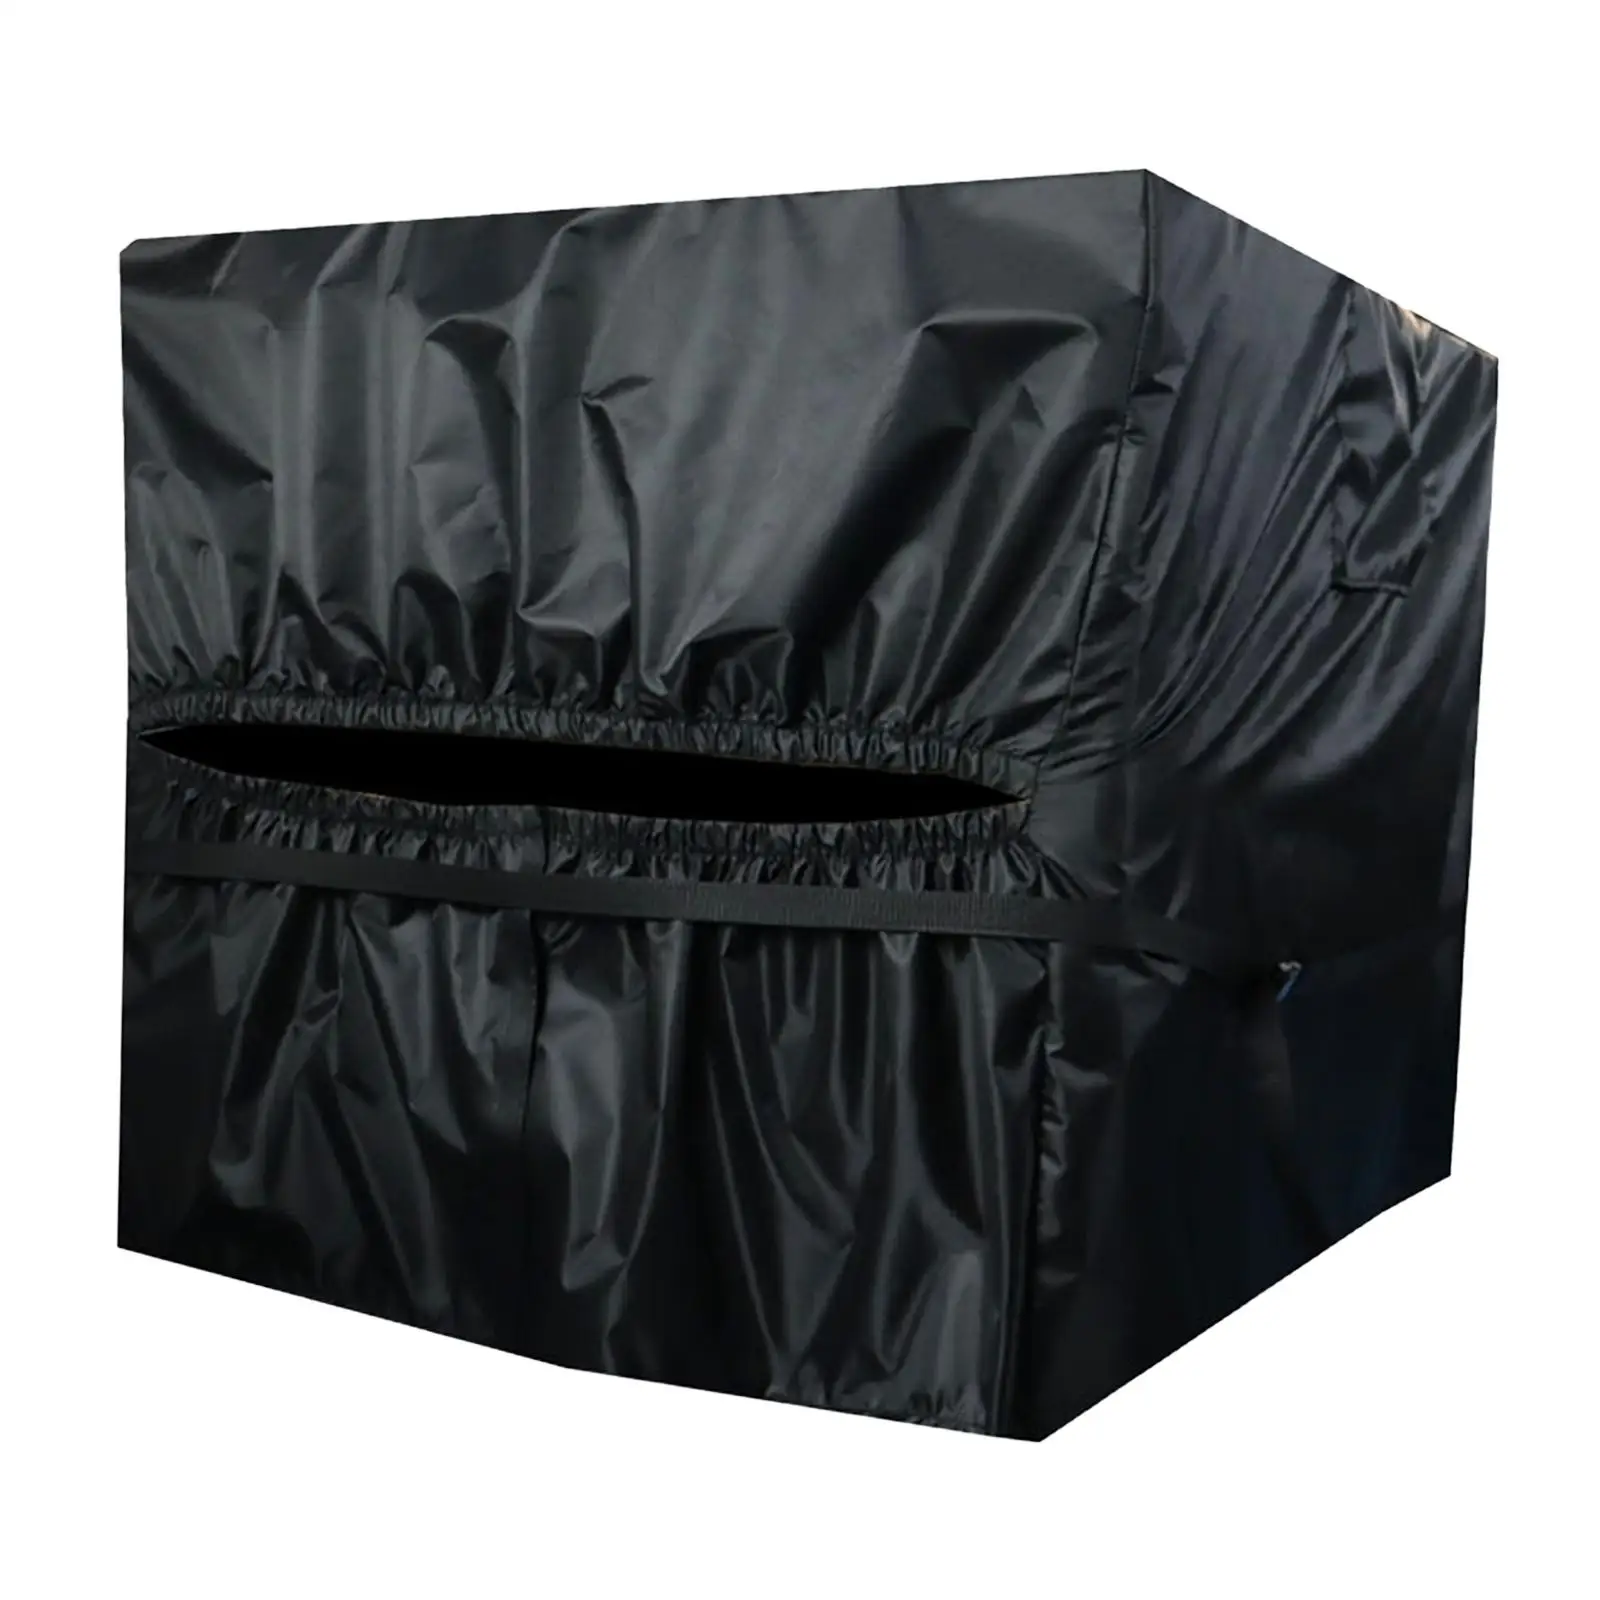 Pool Heater Cover Durable Furniture Covers Square Secure Fit Oxford Black Multifunction Dustproof for Outside Units for Outdoor